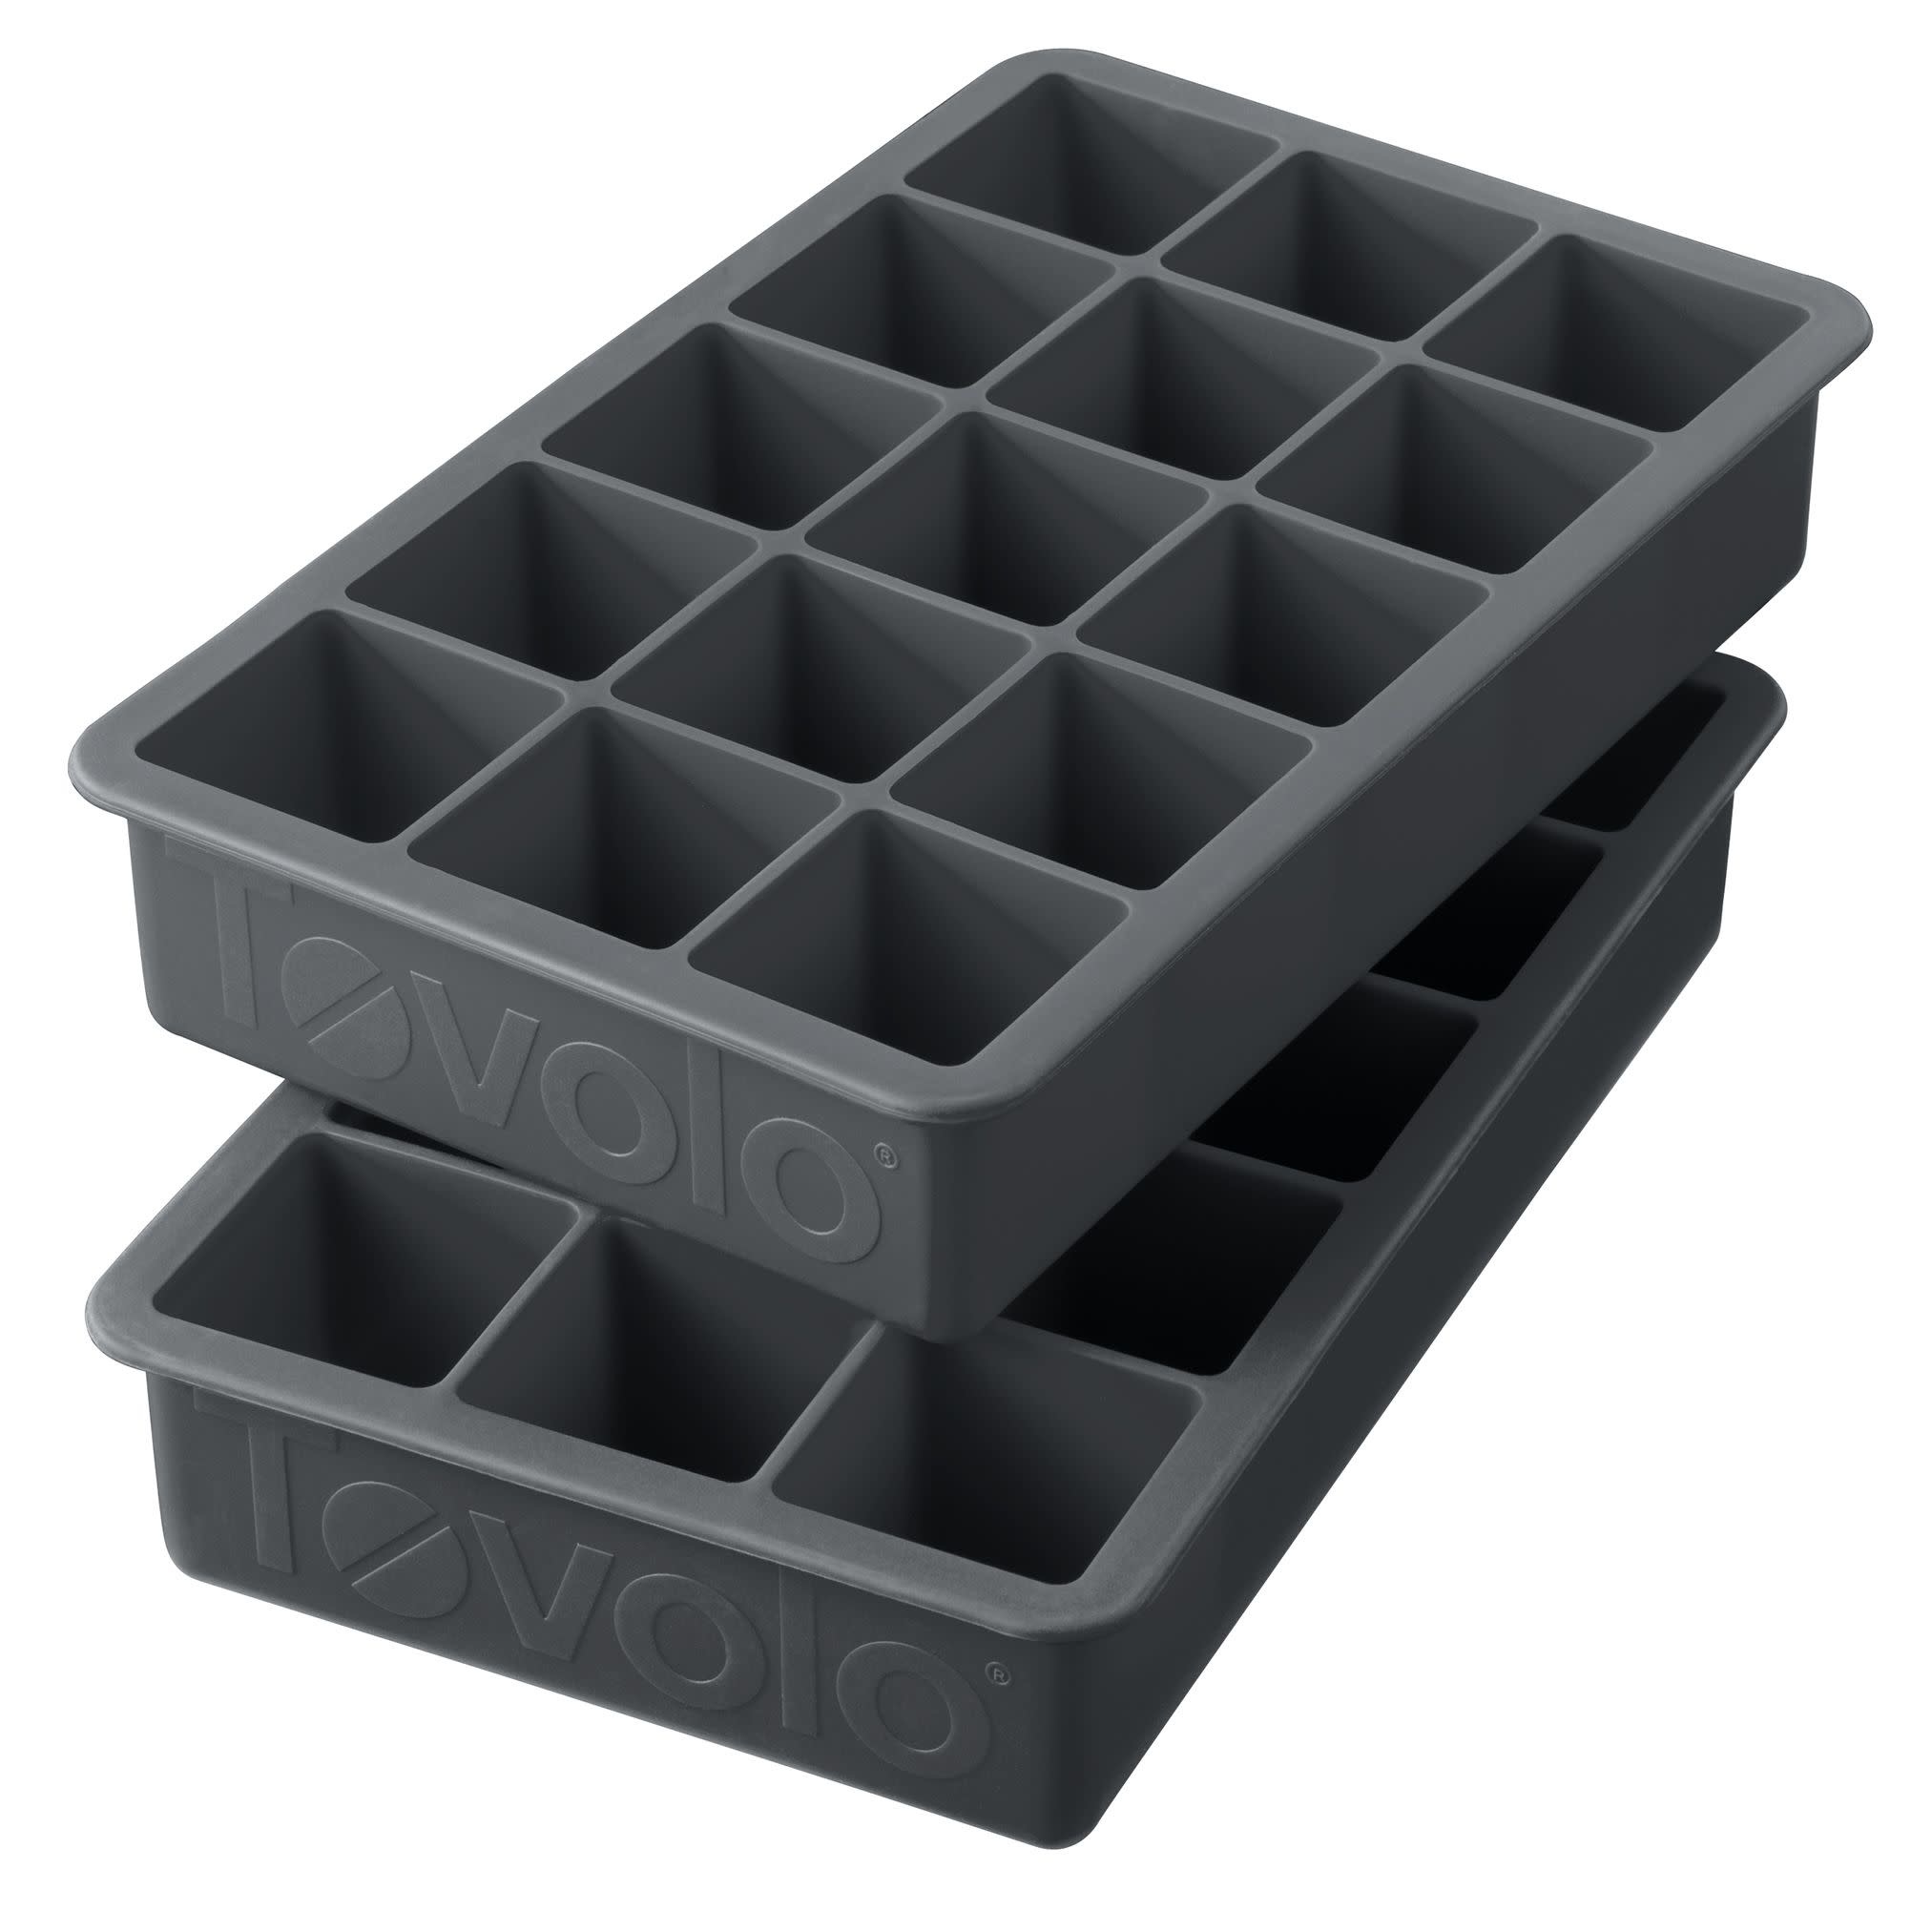 Tovolo King Cube Oyster Gray Silicone Ice Tray